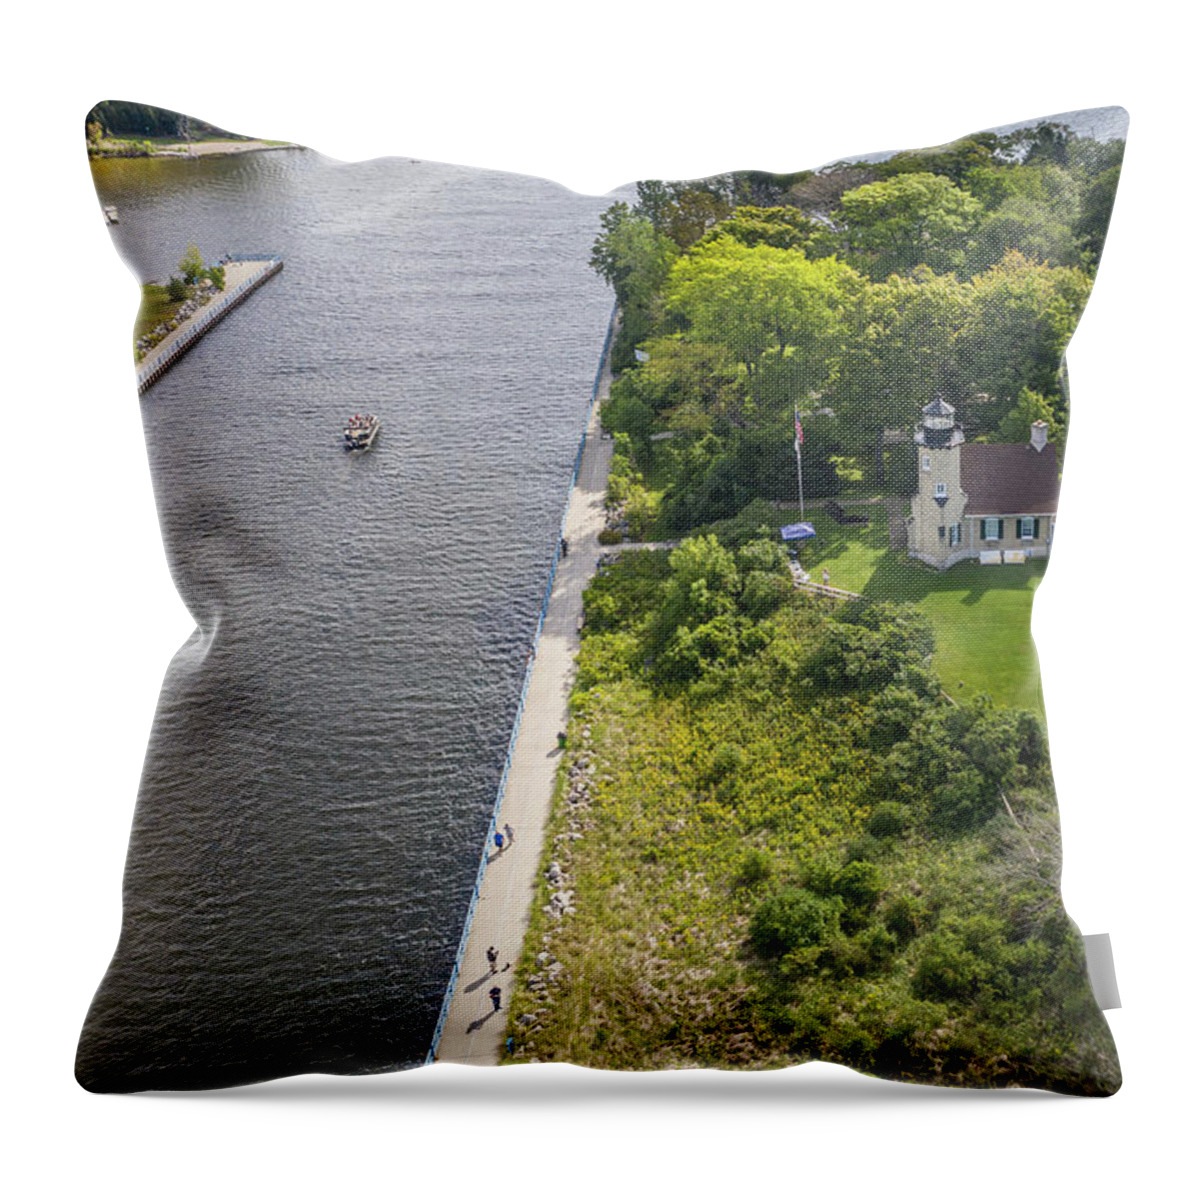 Drone Throw Pillow featuring the photograph Michigan Lighthouse in White River by John McGraw